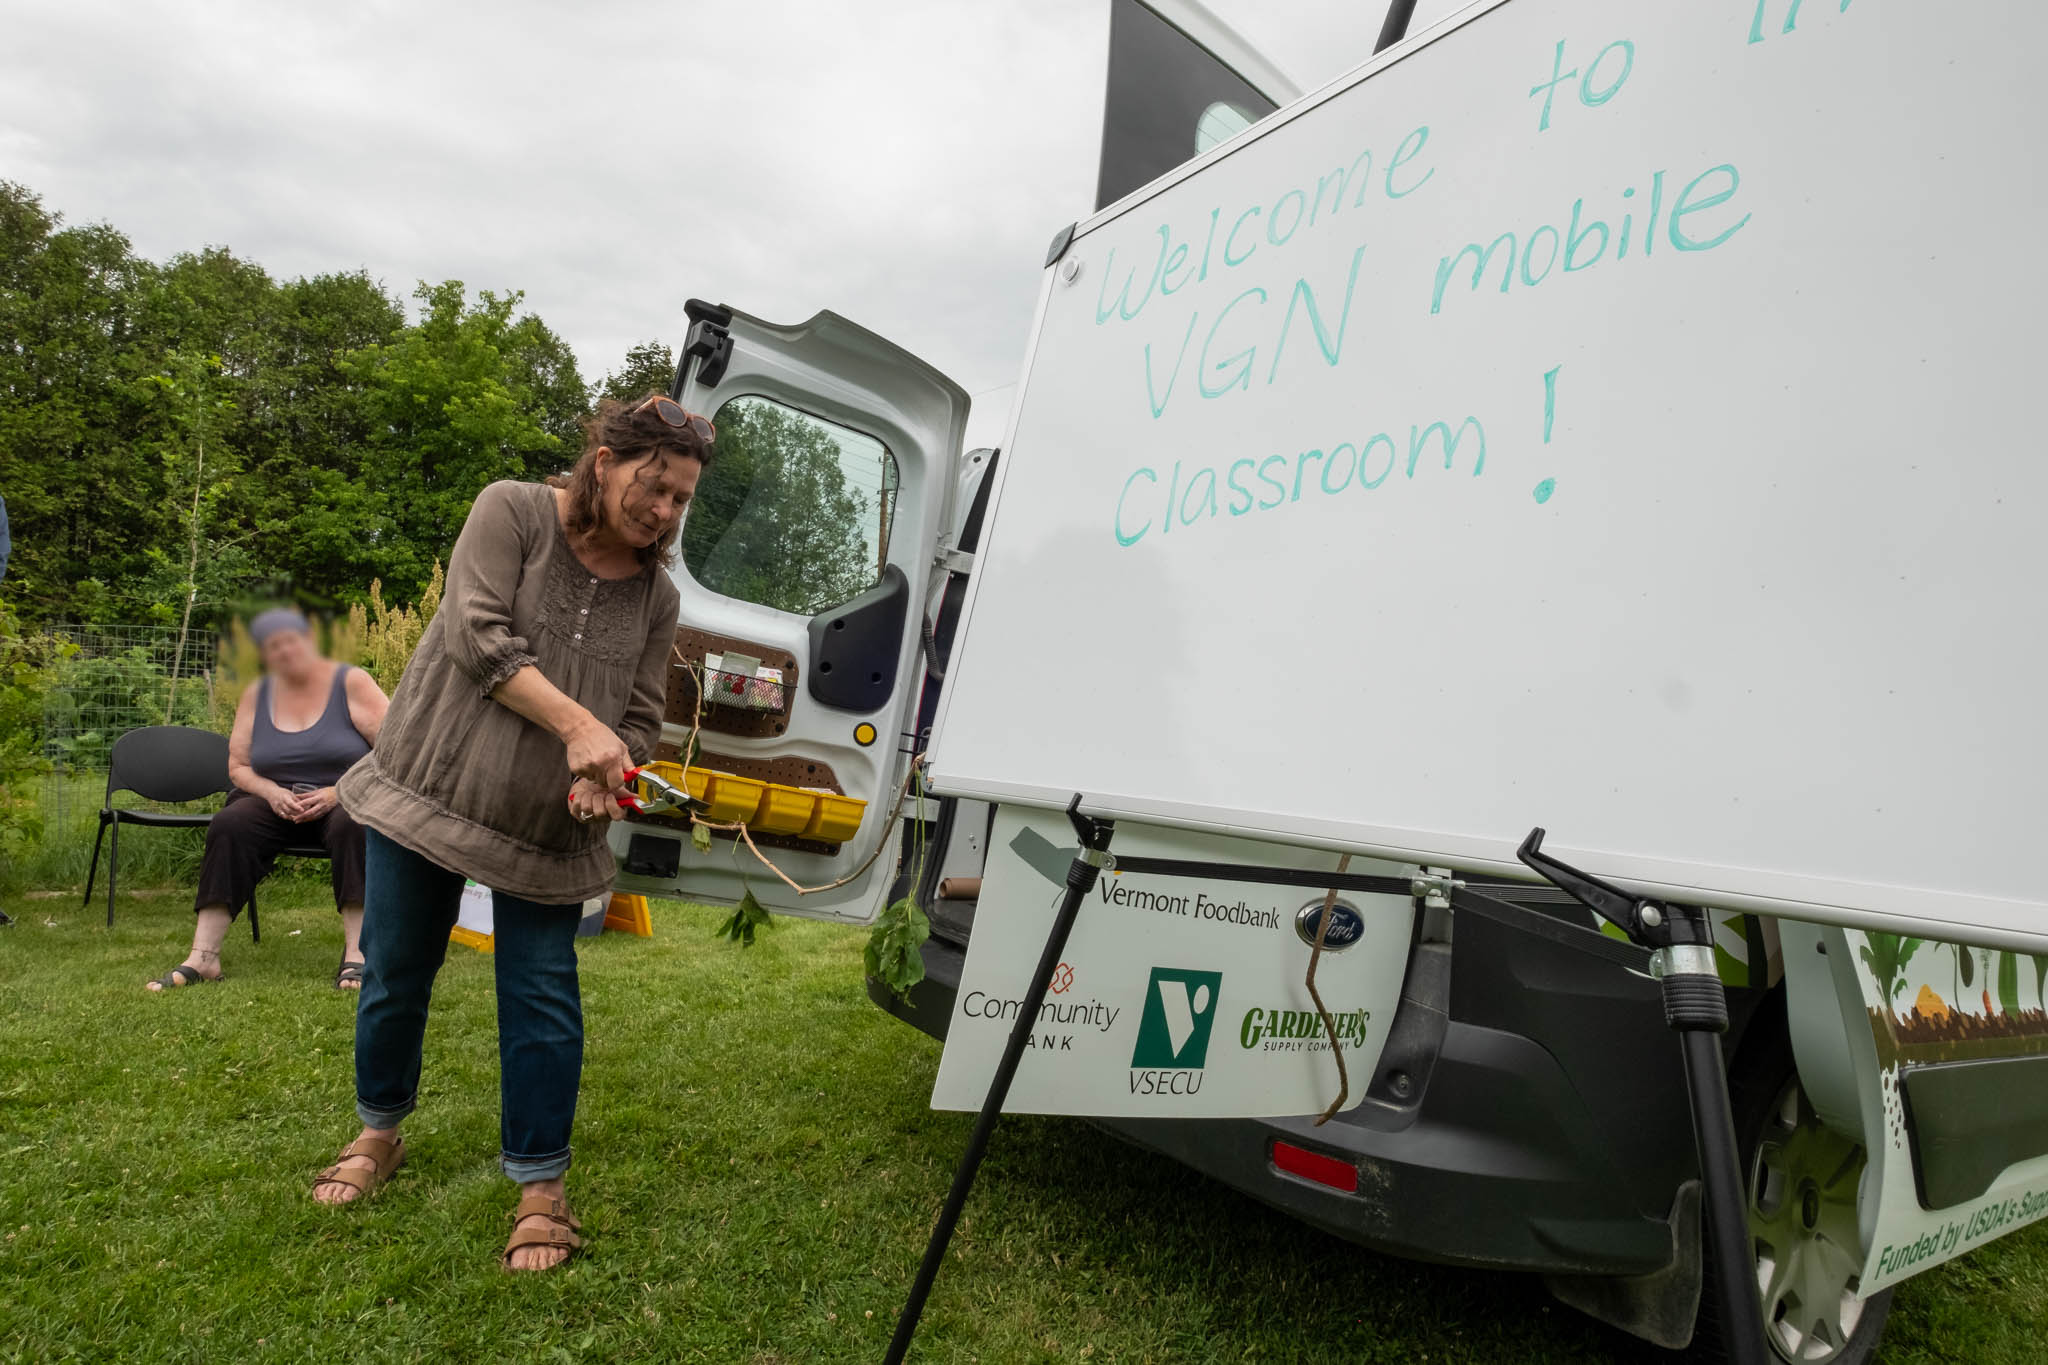 Photo of a woman cutting the ribbon for the new VGN Mobile Classroom.